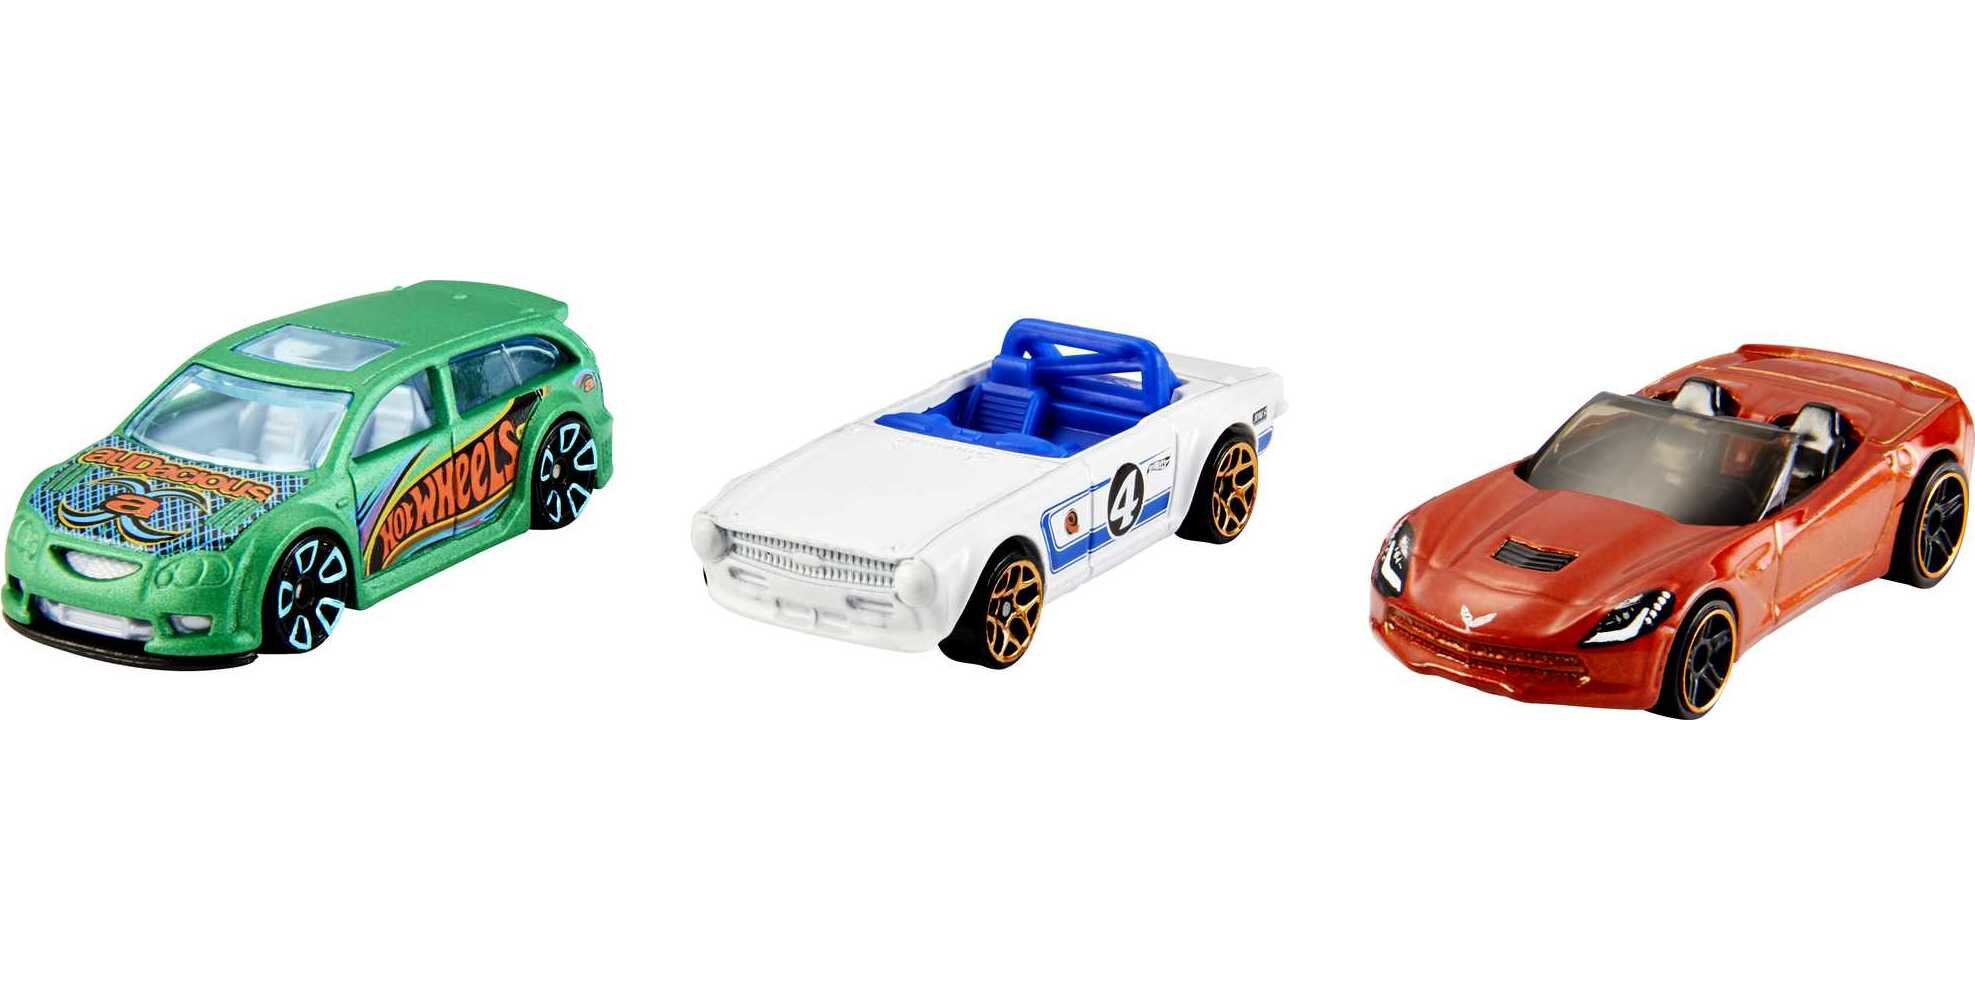 Hot Wheels 3-Car Pack, Multipack of 3 Hot Wheels Vehicles, Gift for Kids 3 Years & Up (Styles May Vary) - image 1 of 6